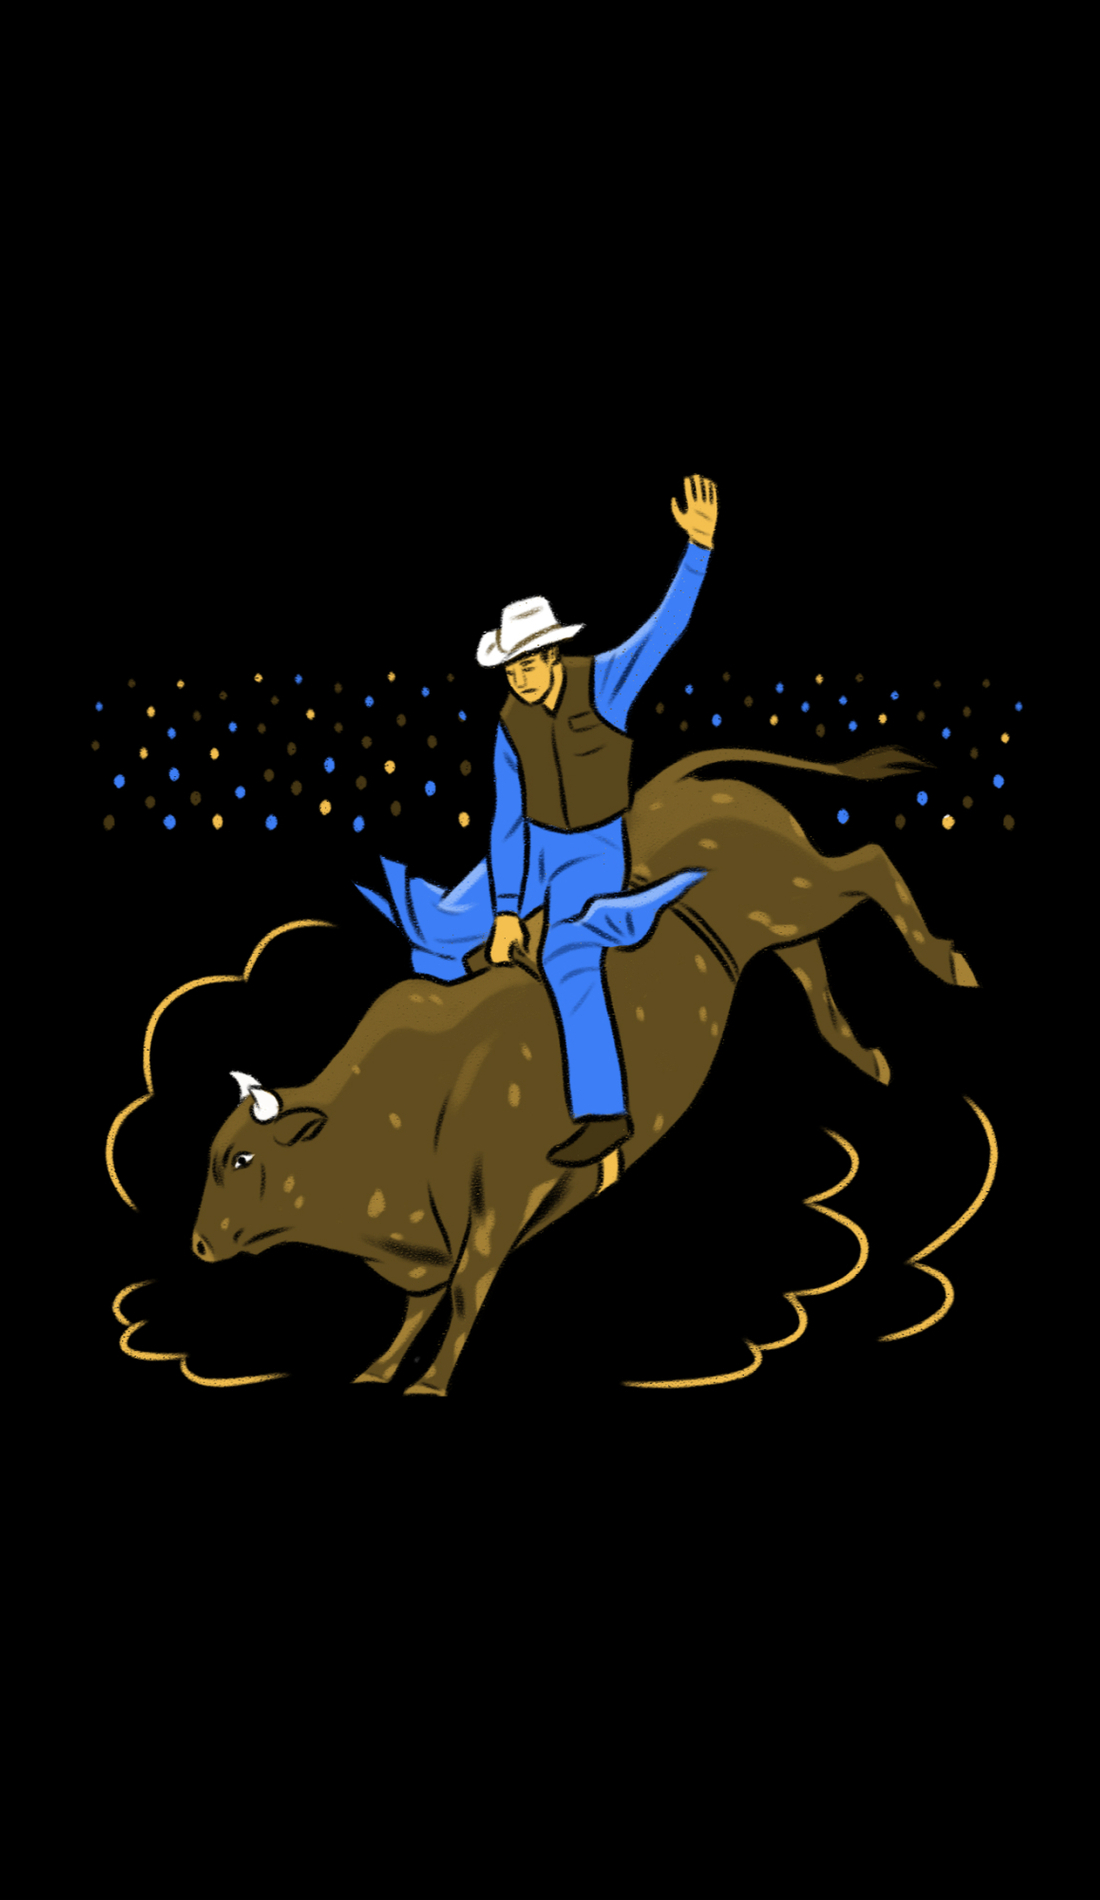 A National Western Stock Show live event